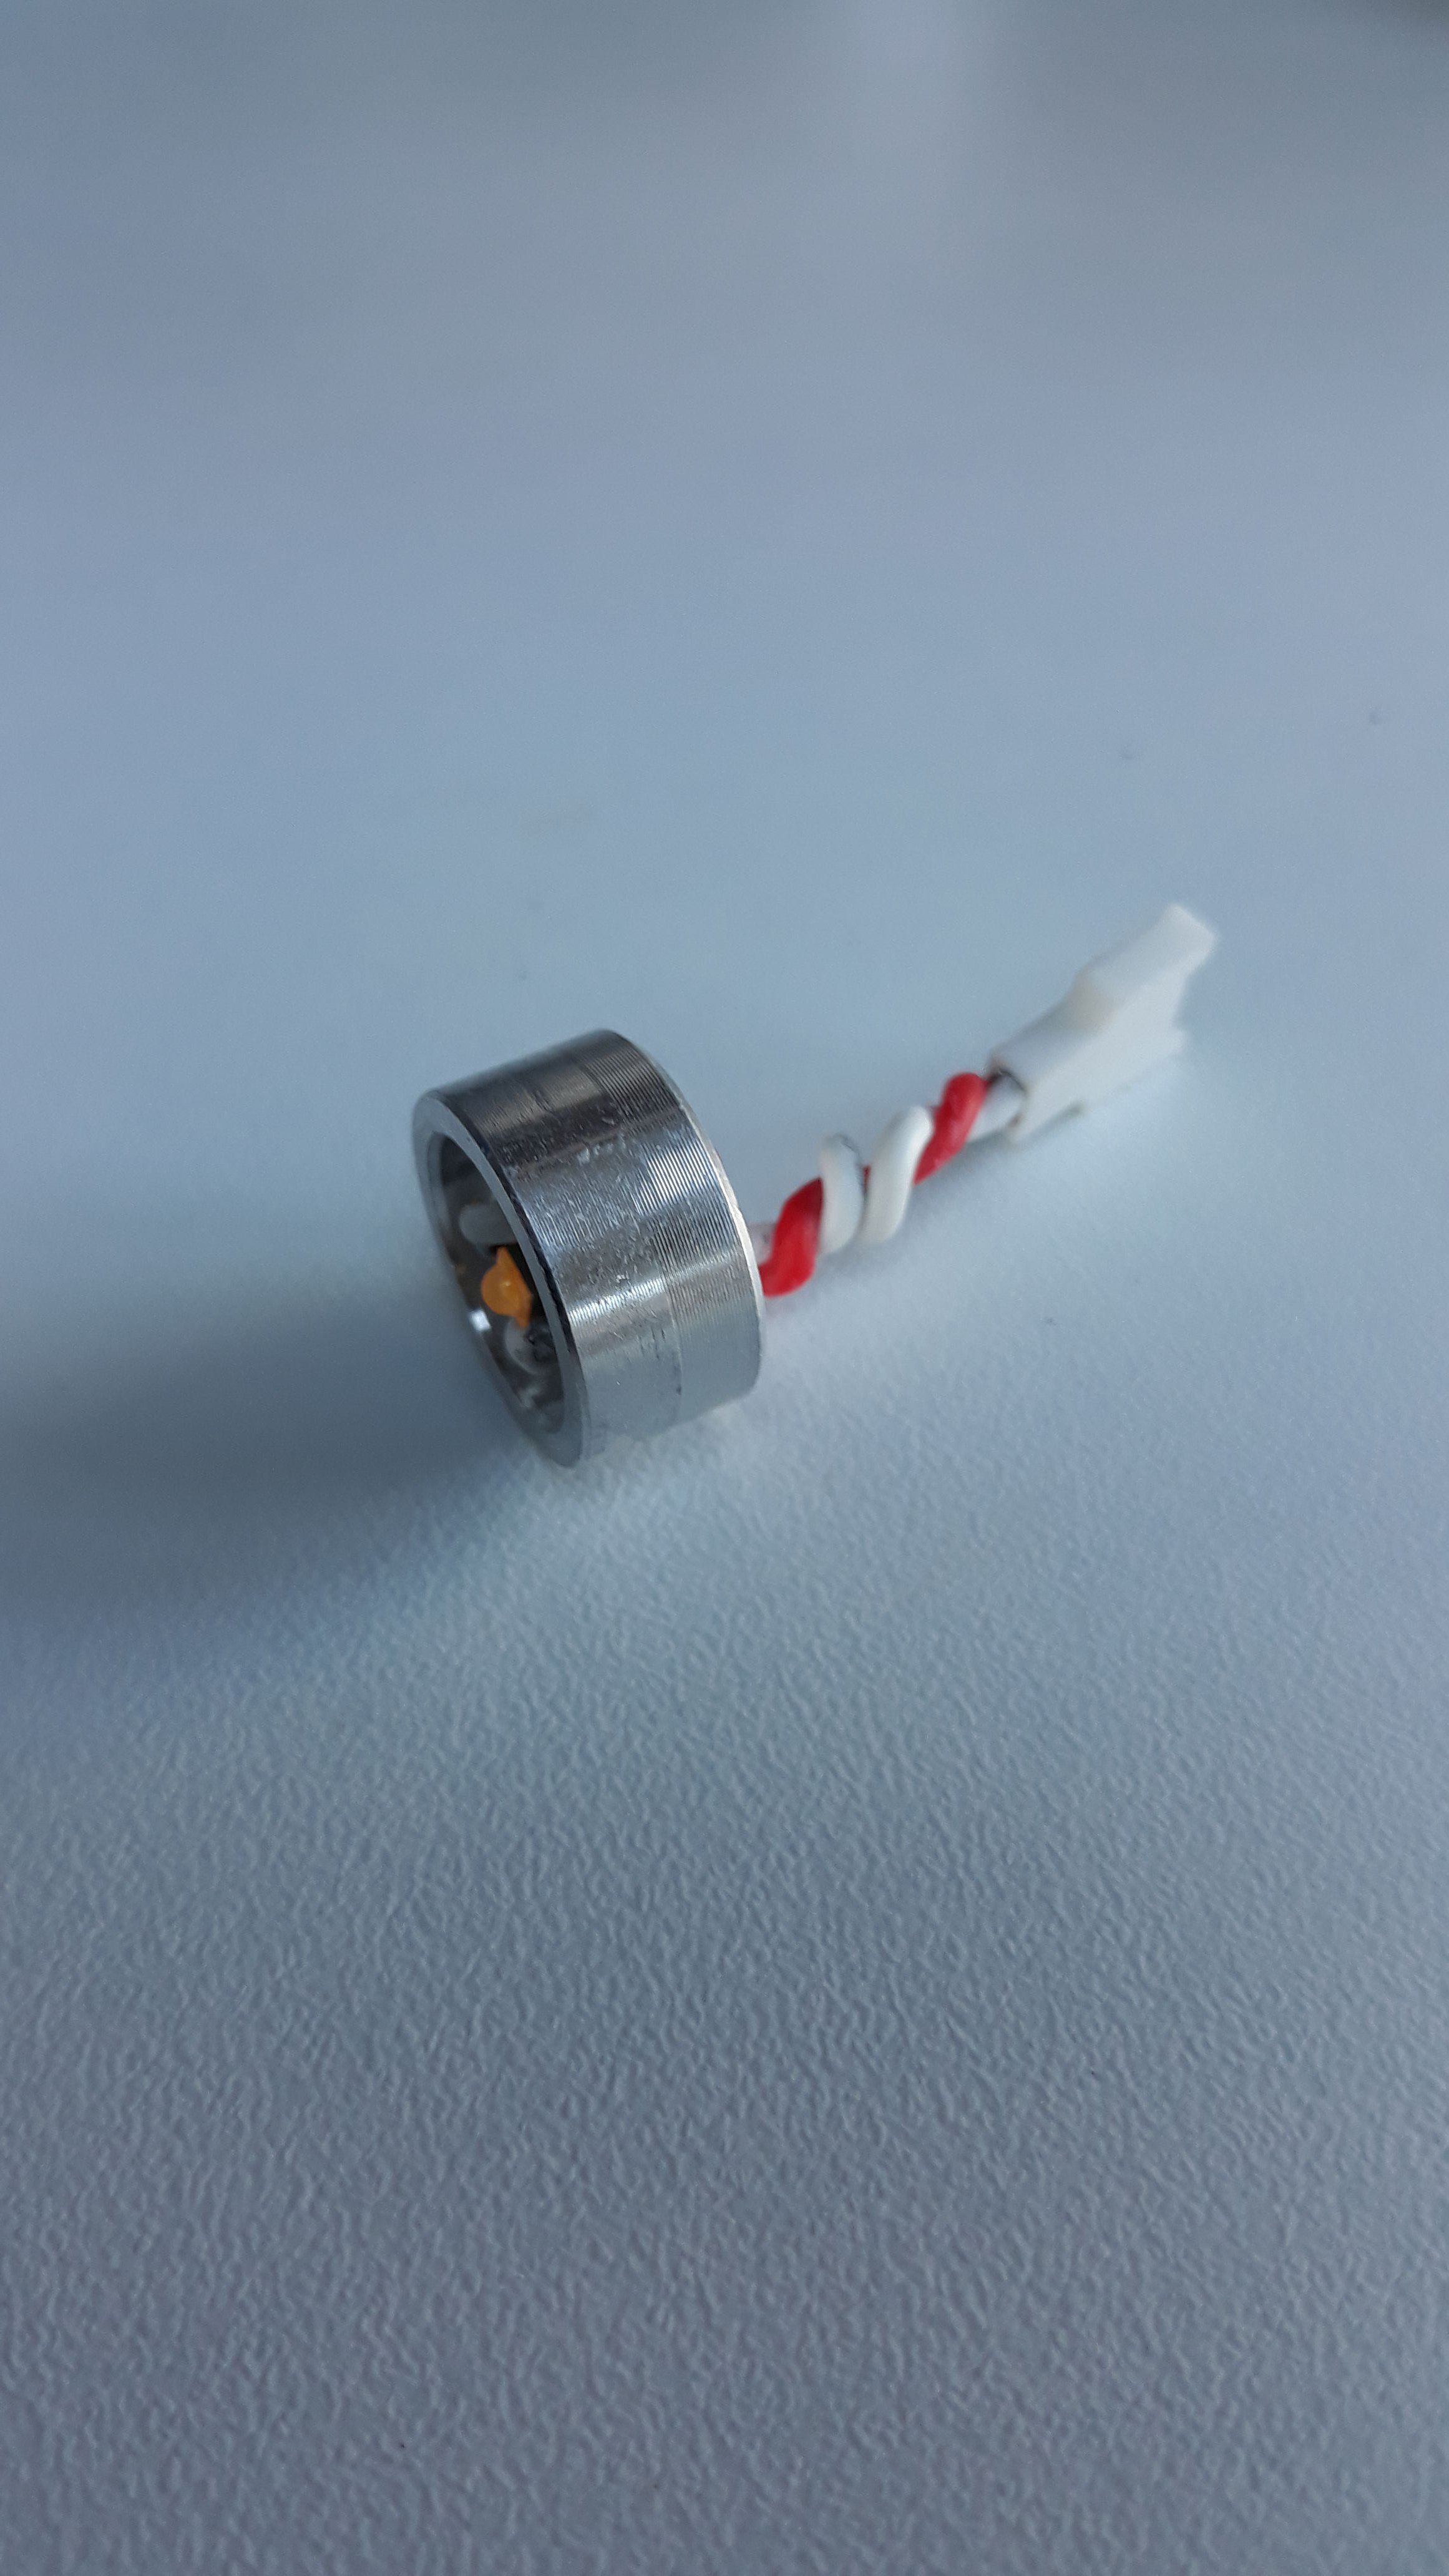 Can anyone identify this 3W LED light? LED light 1 - EletriciansForums.net